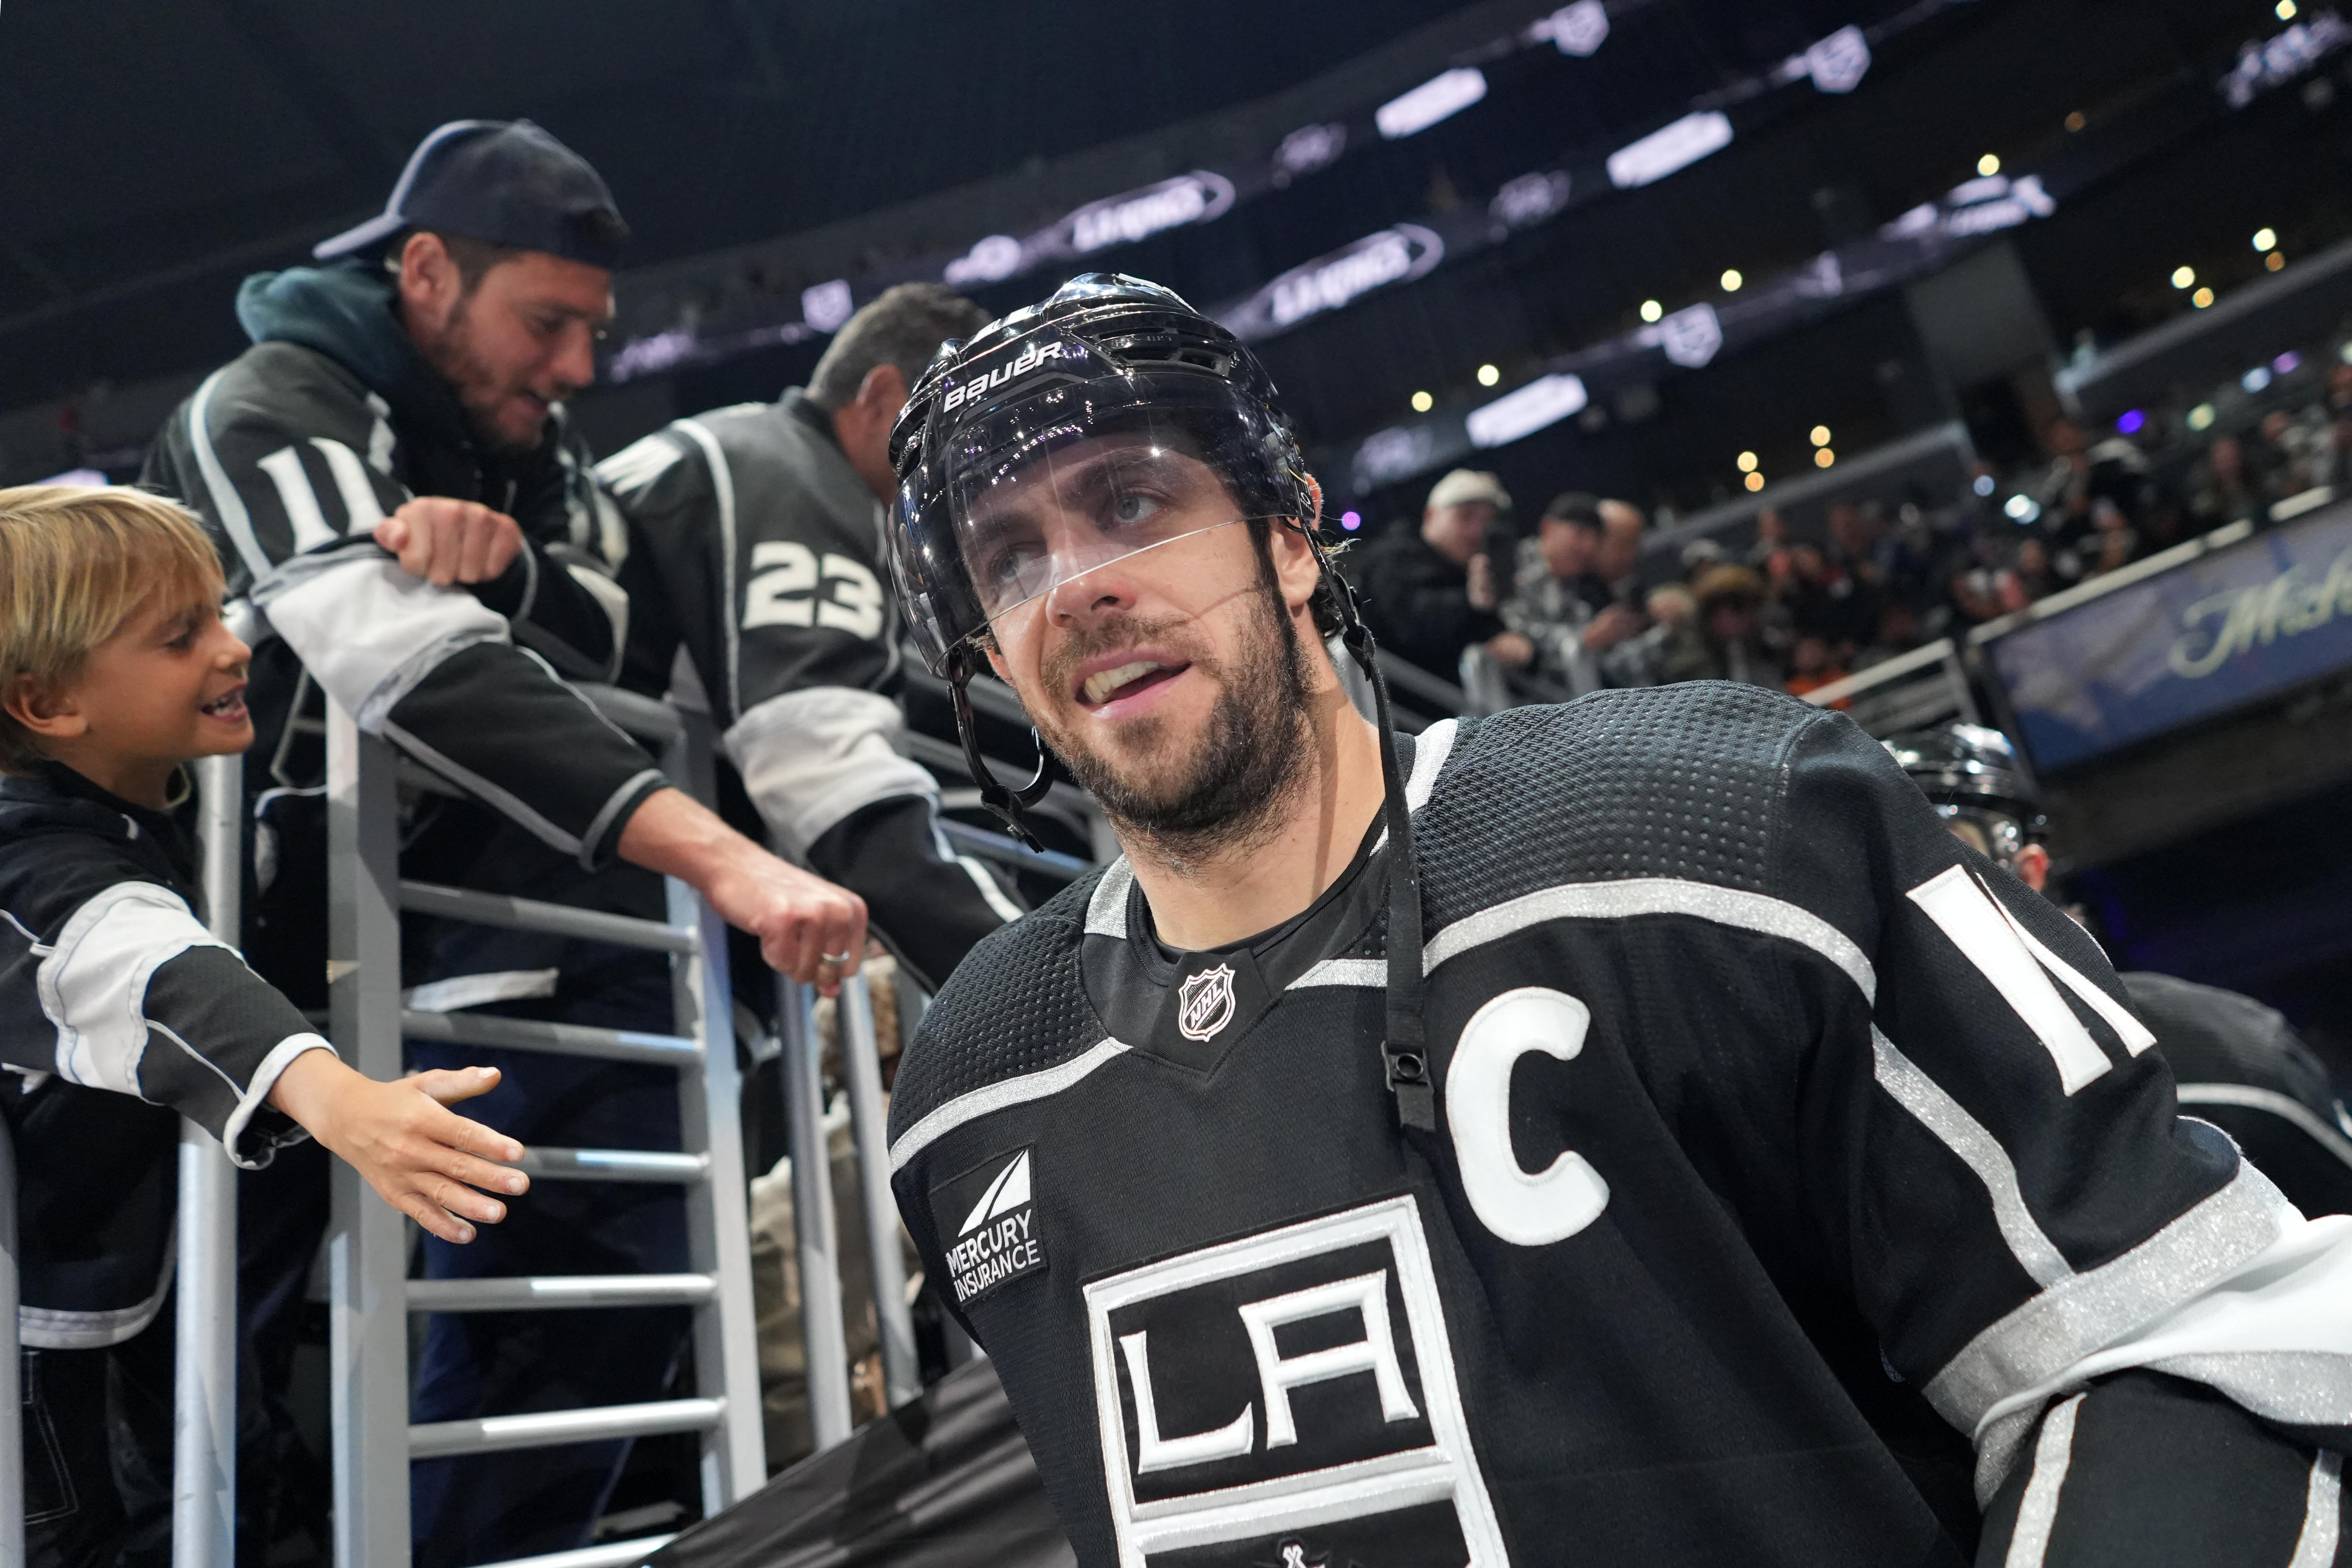 LA Kings Announce Mercury Insurance as Team's First-ever Jersey